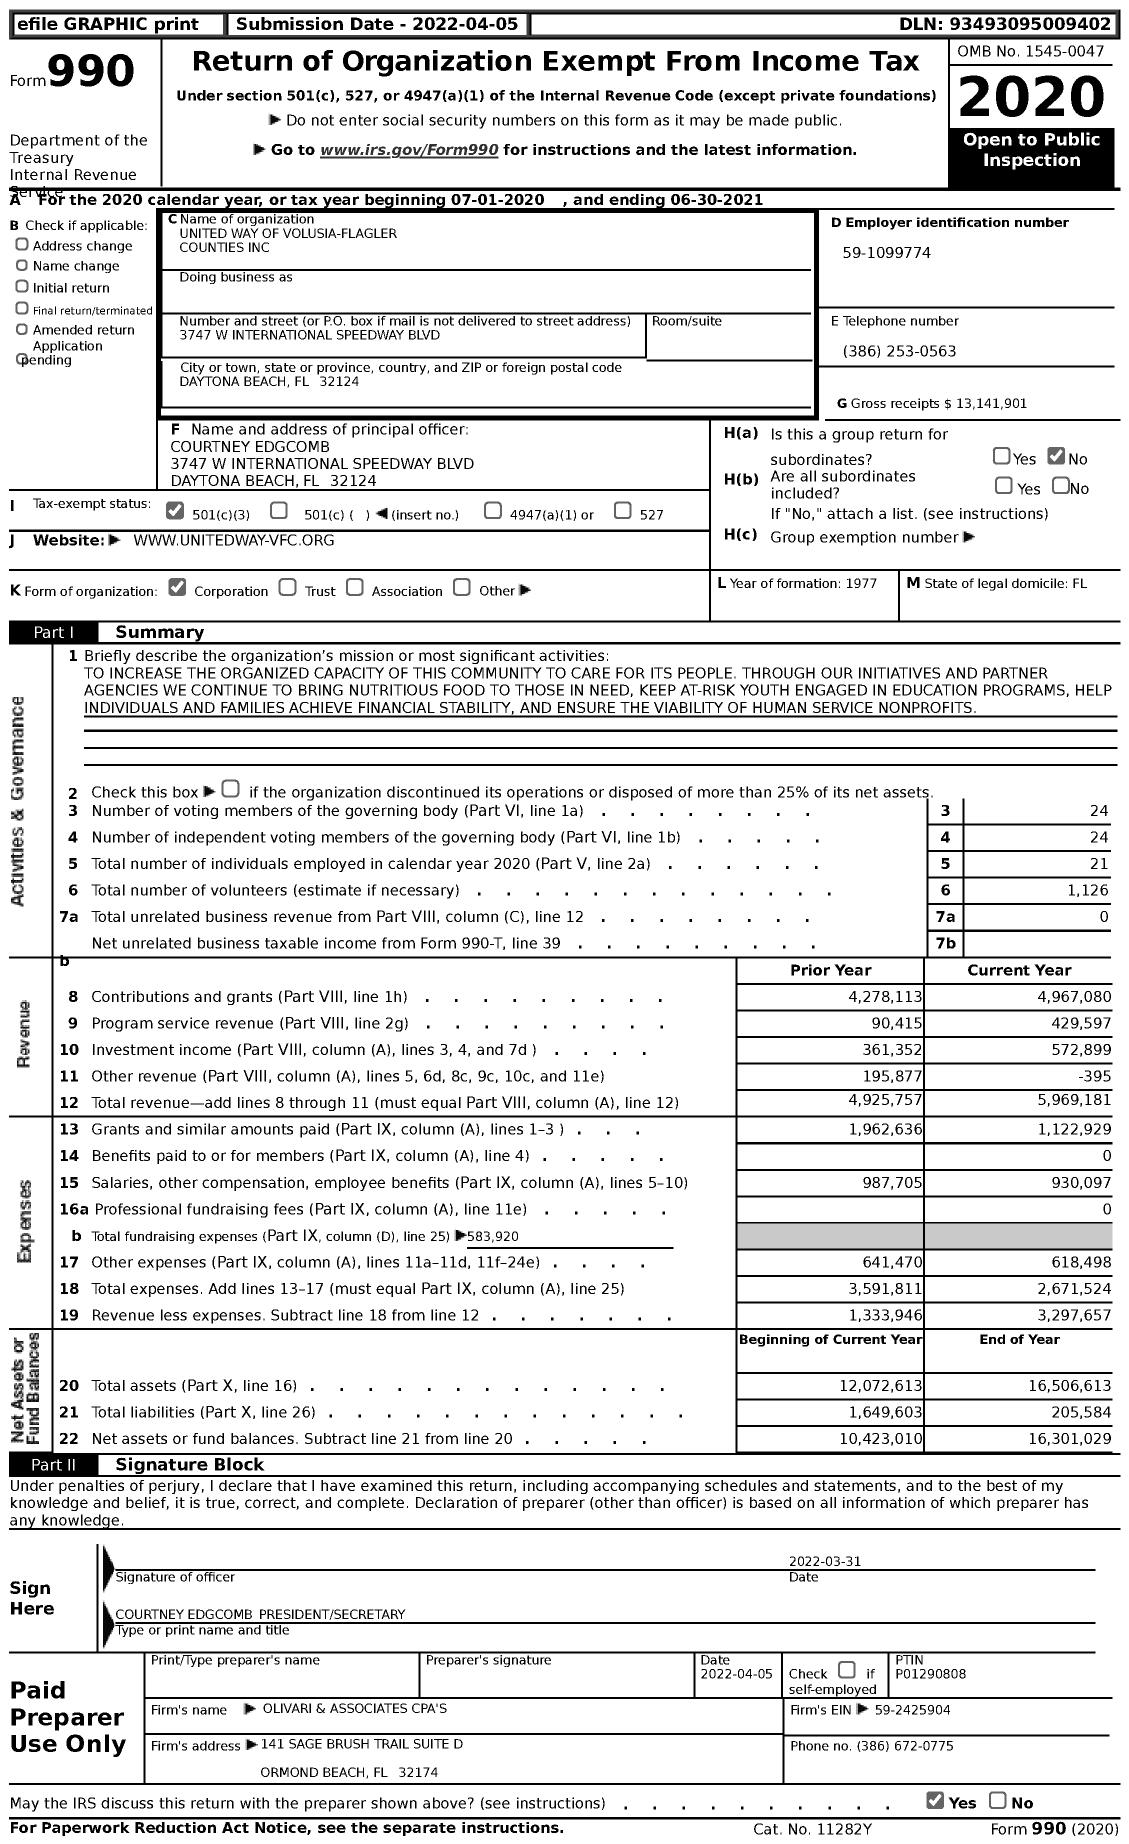 Image of first page of 2020 Form 990 for United Way of Volusia-Flagler Counties